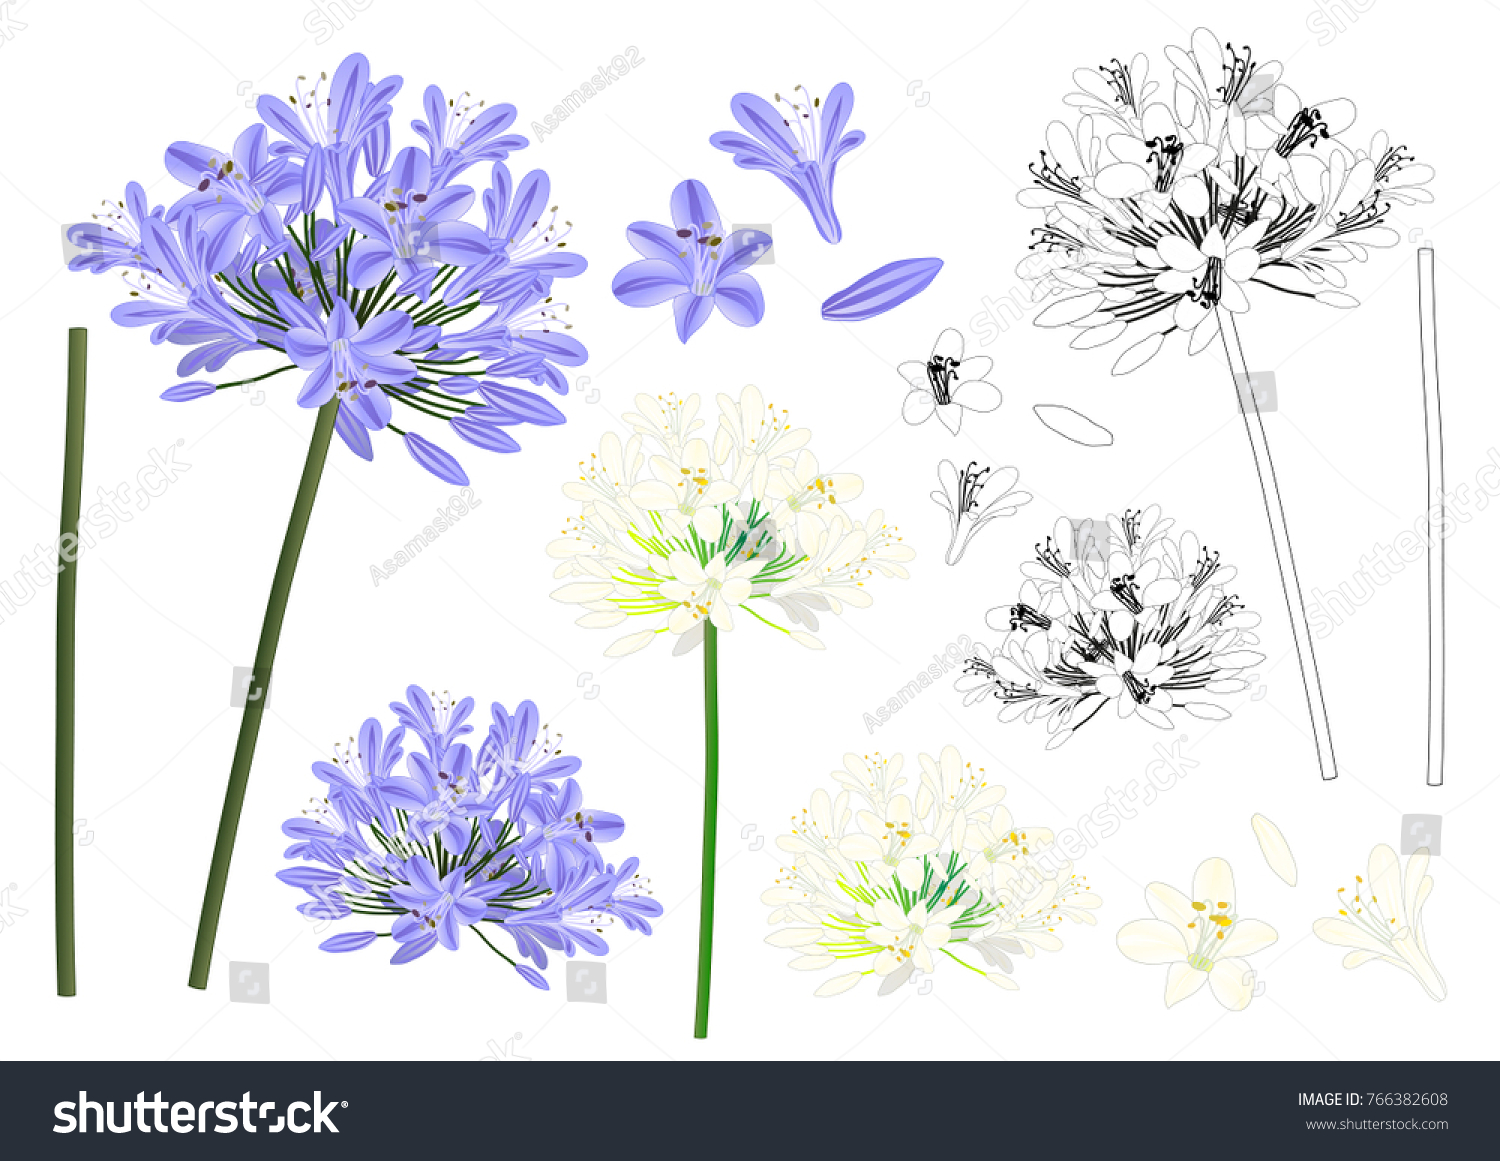 SVG of Blue Purple Agapanthus Outline - Lily of the Nile, African Lily. Vector Illustration. isolated on White Background. svg